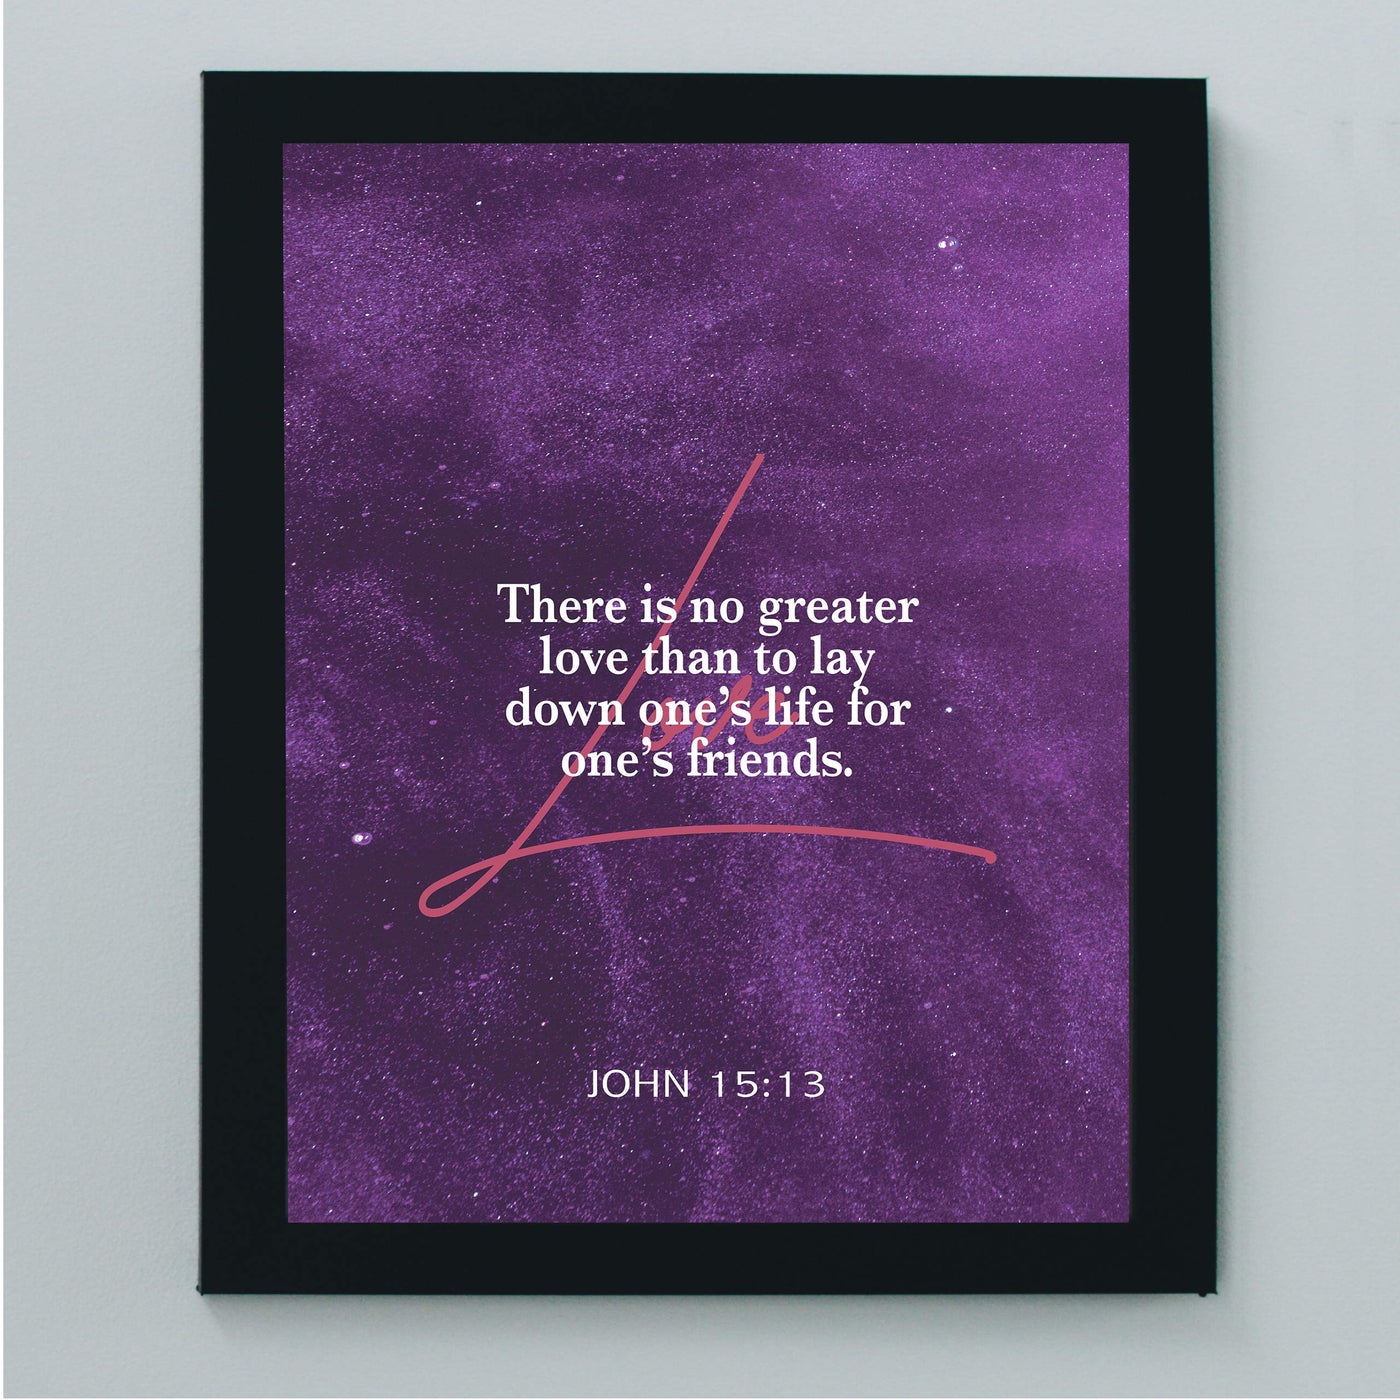 ?No Greater Love-For One's Friends?- John 15:13- Bible Verse Wall Art- 8 x 10" Modern Typographic Design. Scripture Wall Print-Ready to Frame. Home-Office-Church D?cor. Great Christian Gift!